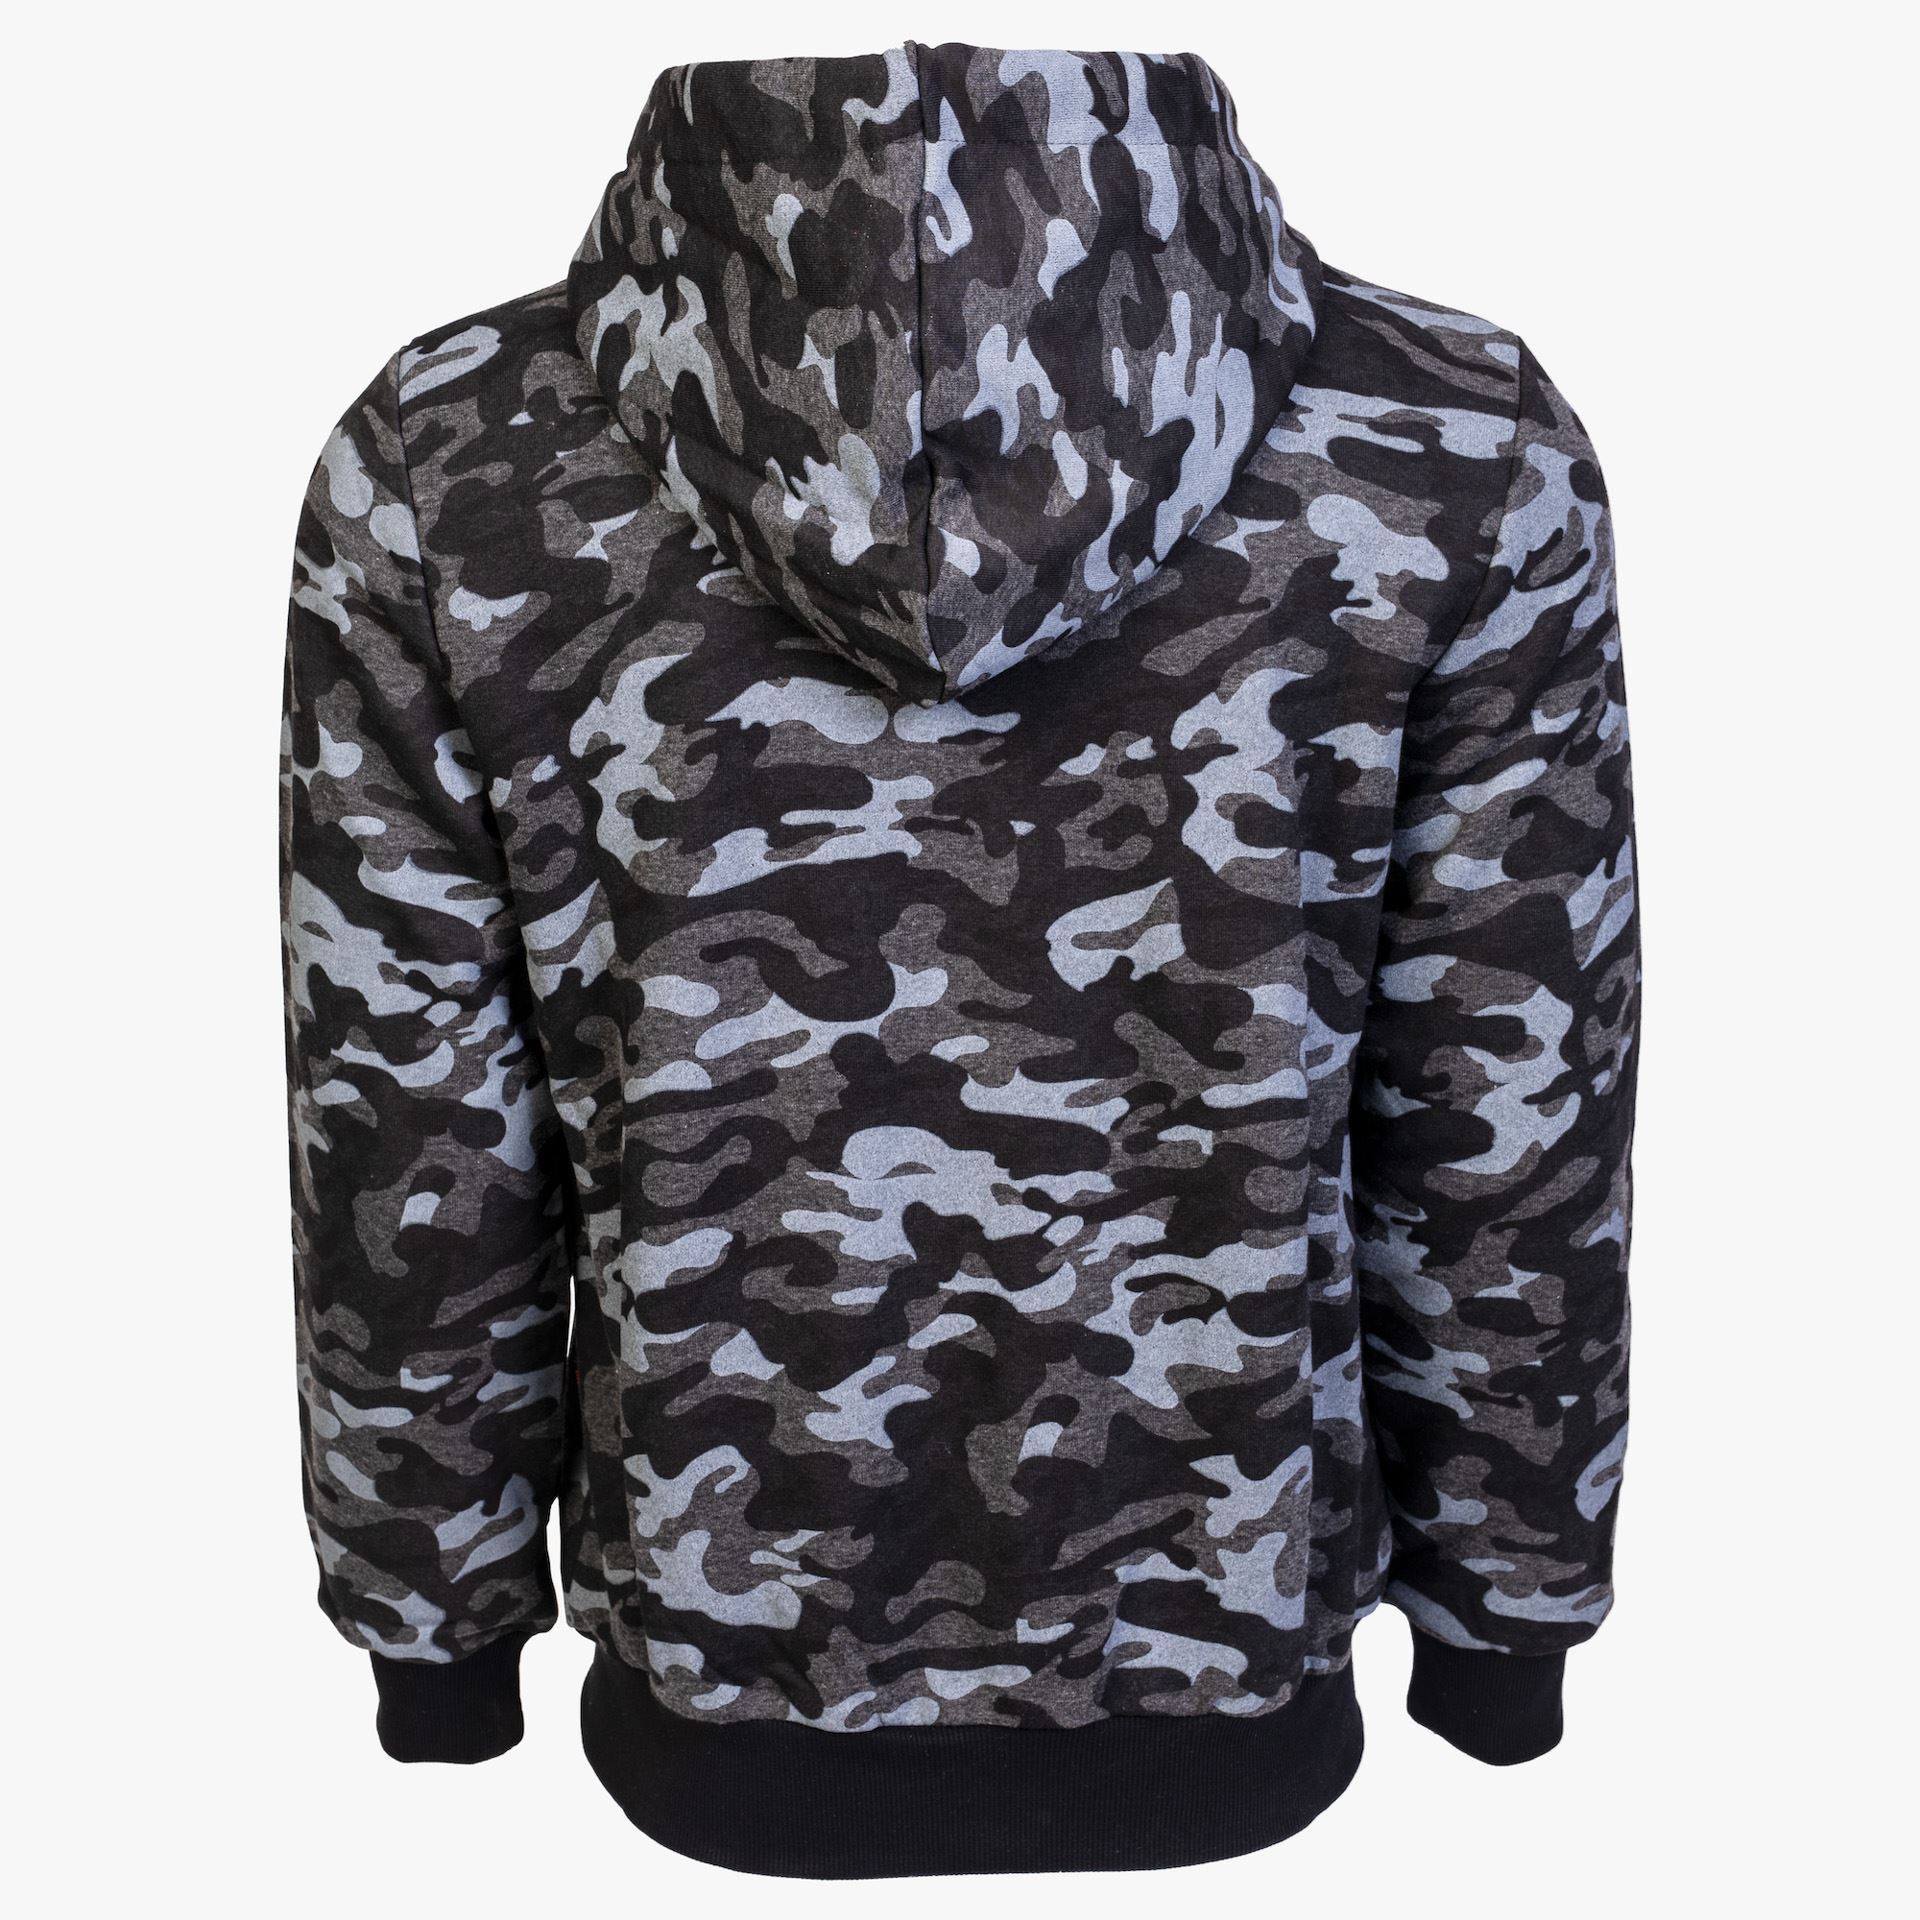 Arsenal Black Camo Cotton-Poly Relaxed Fit Zip-Up Hoodie at K-Var